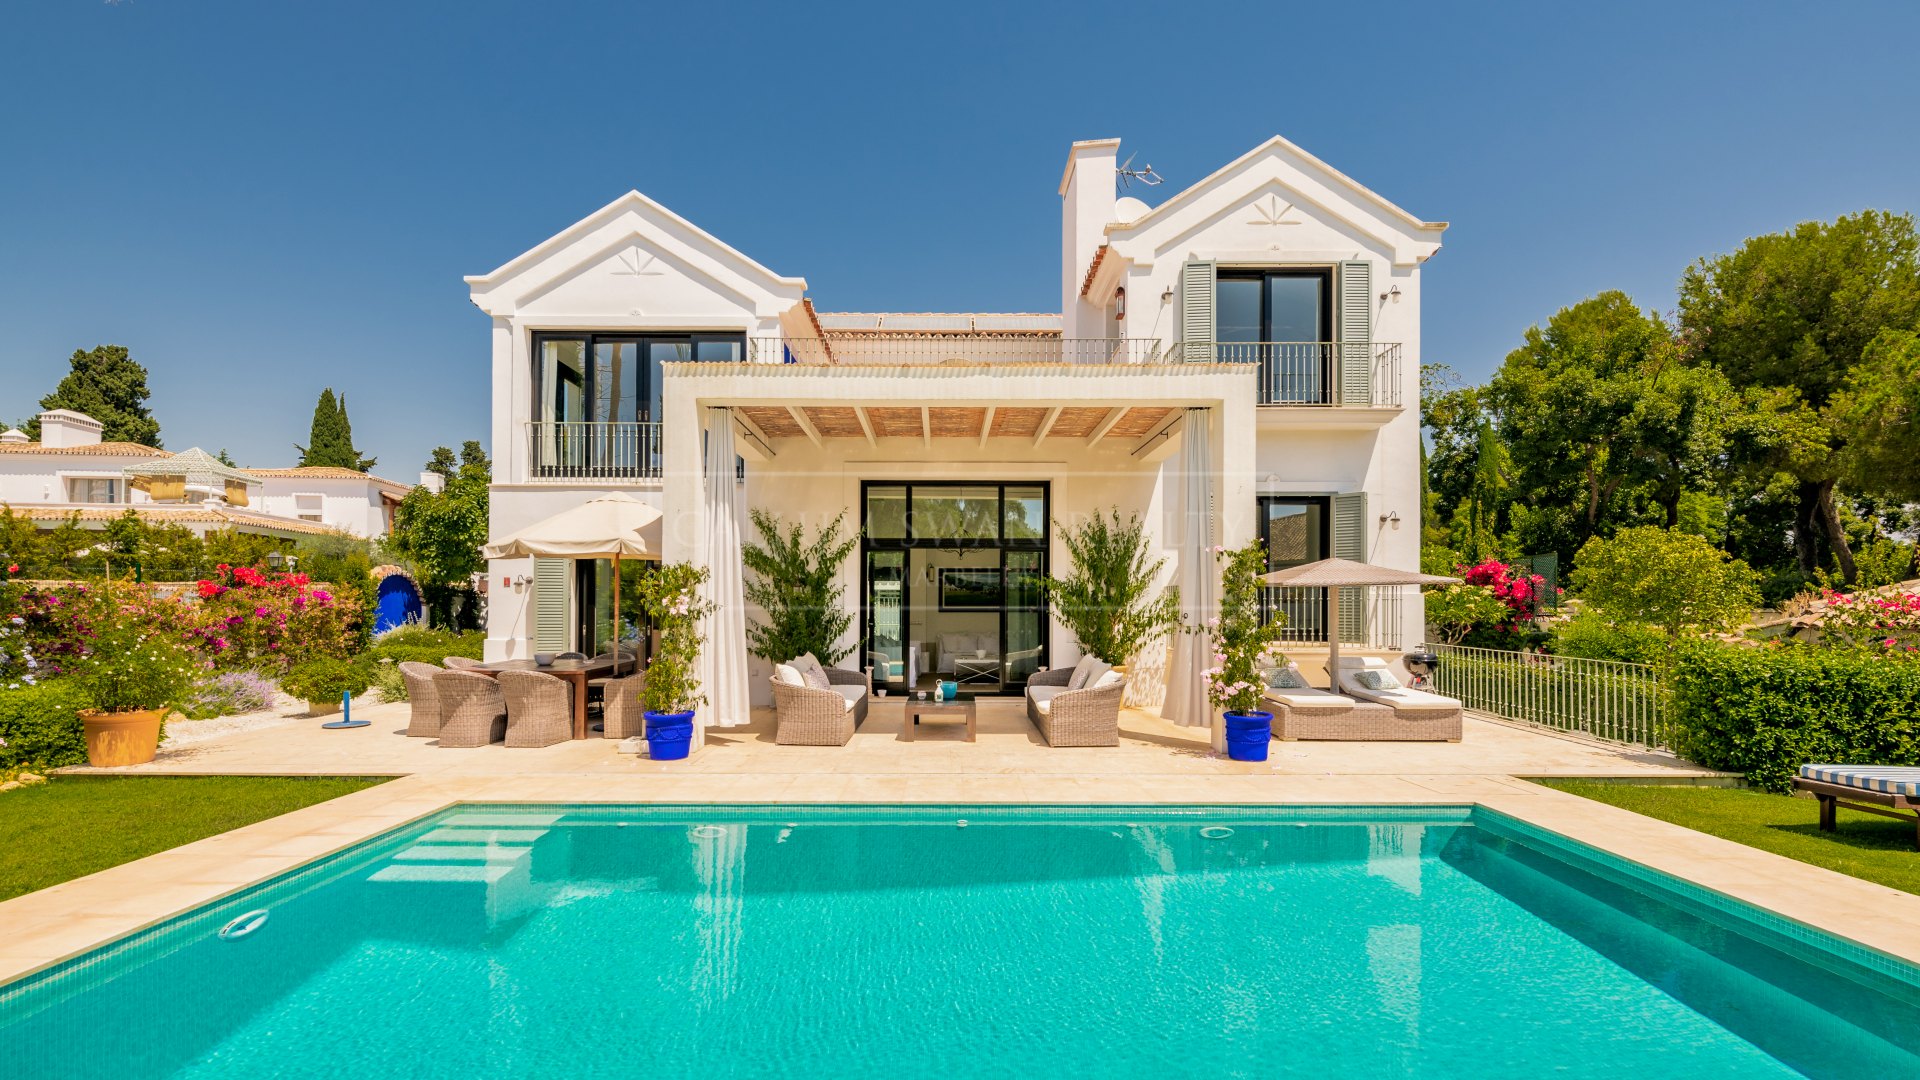 Luxury villa for rent in Marbella Club with traditional Marbella style and charm